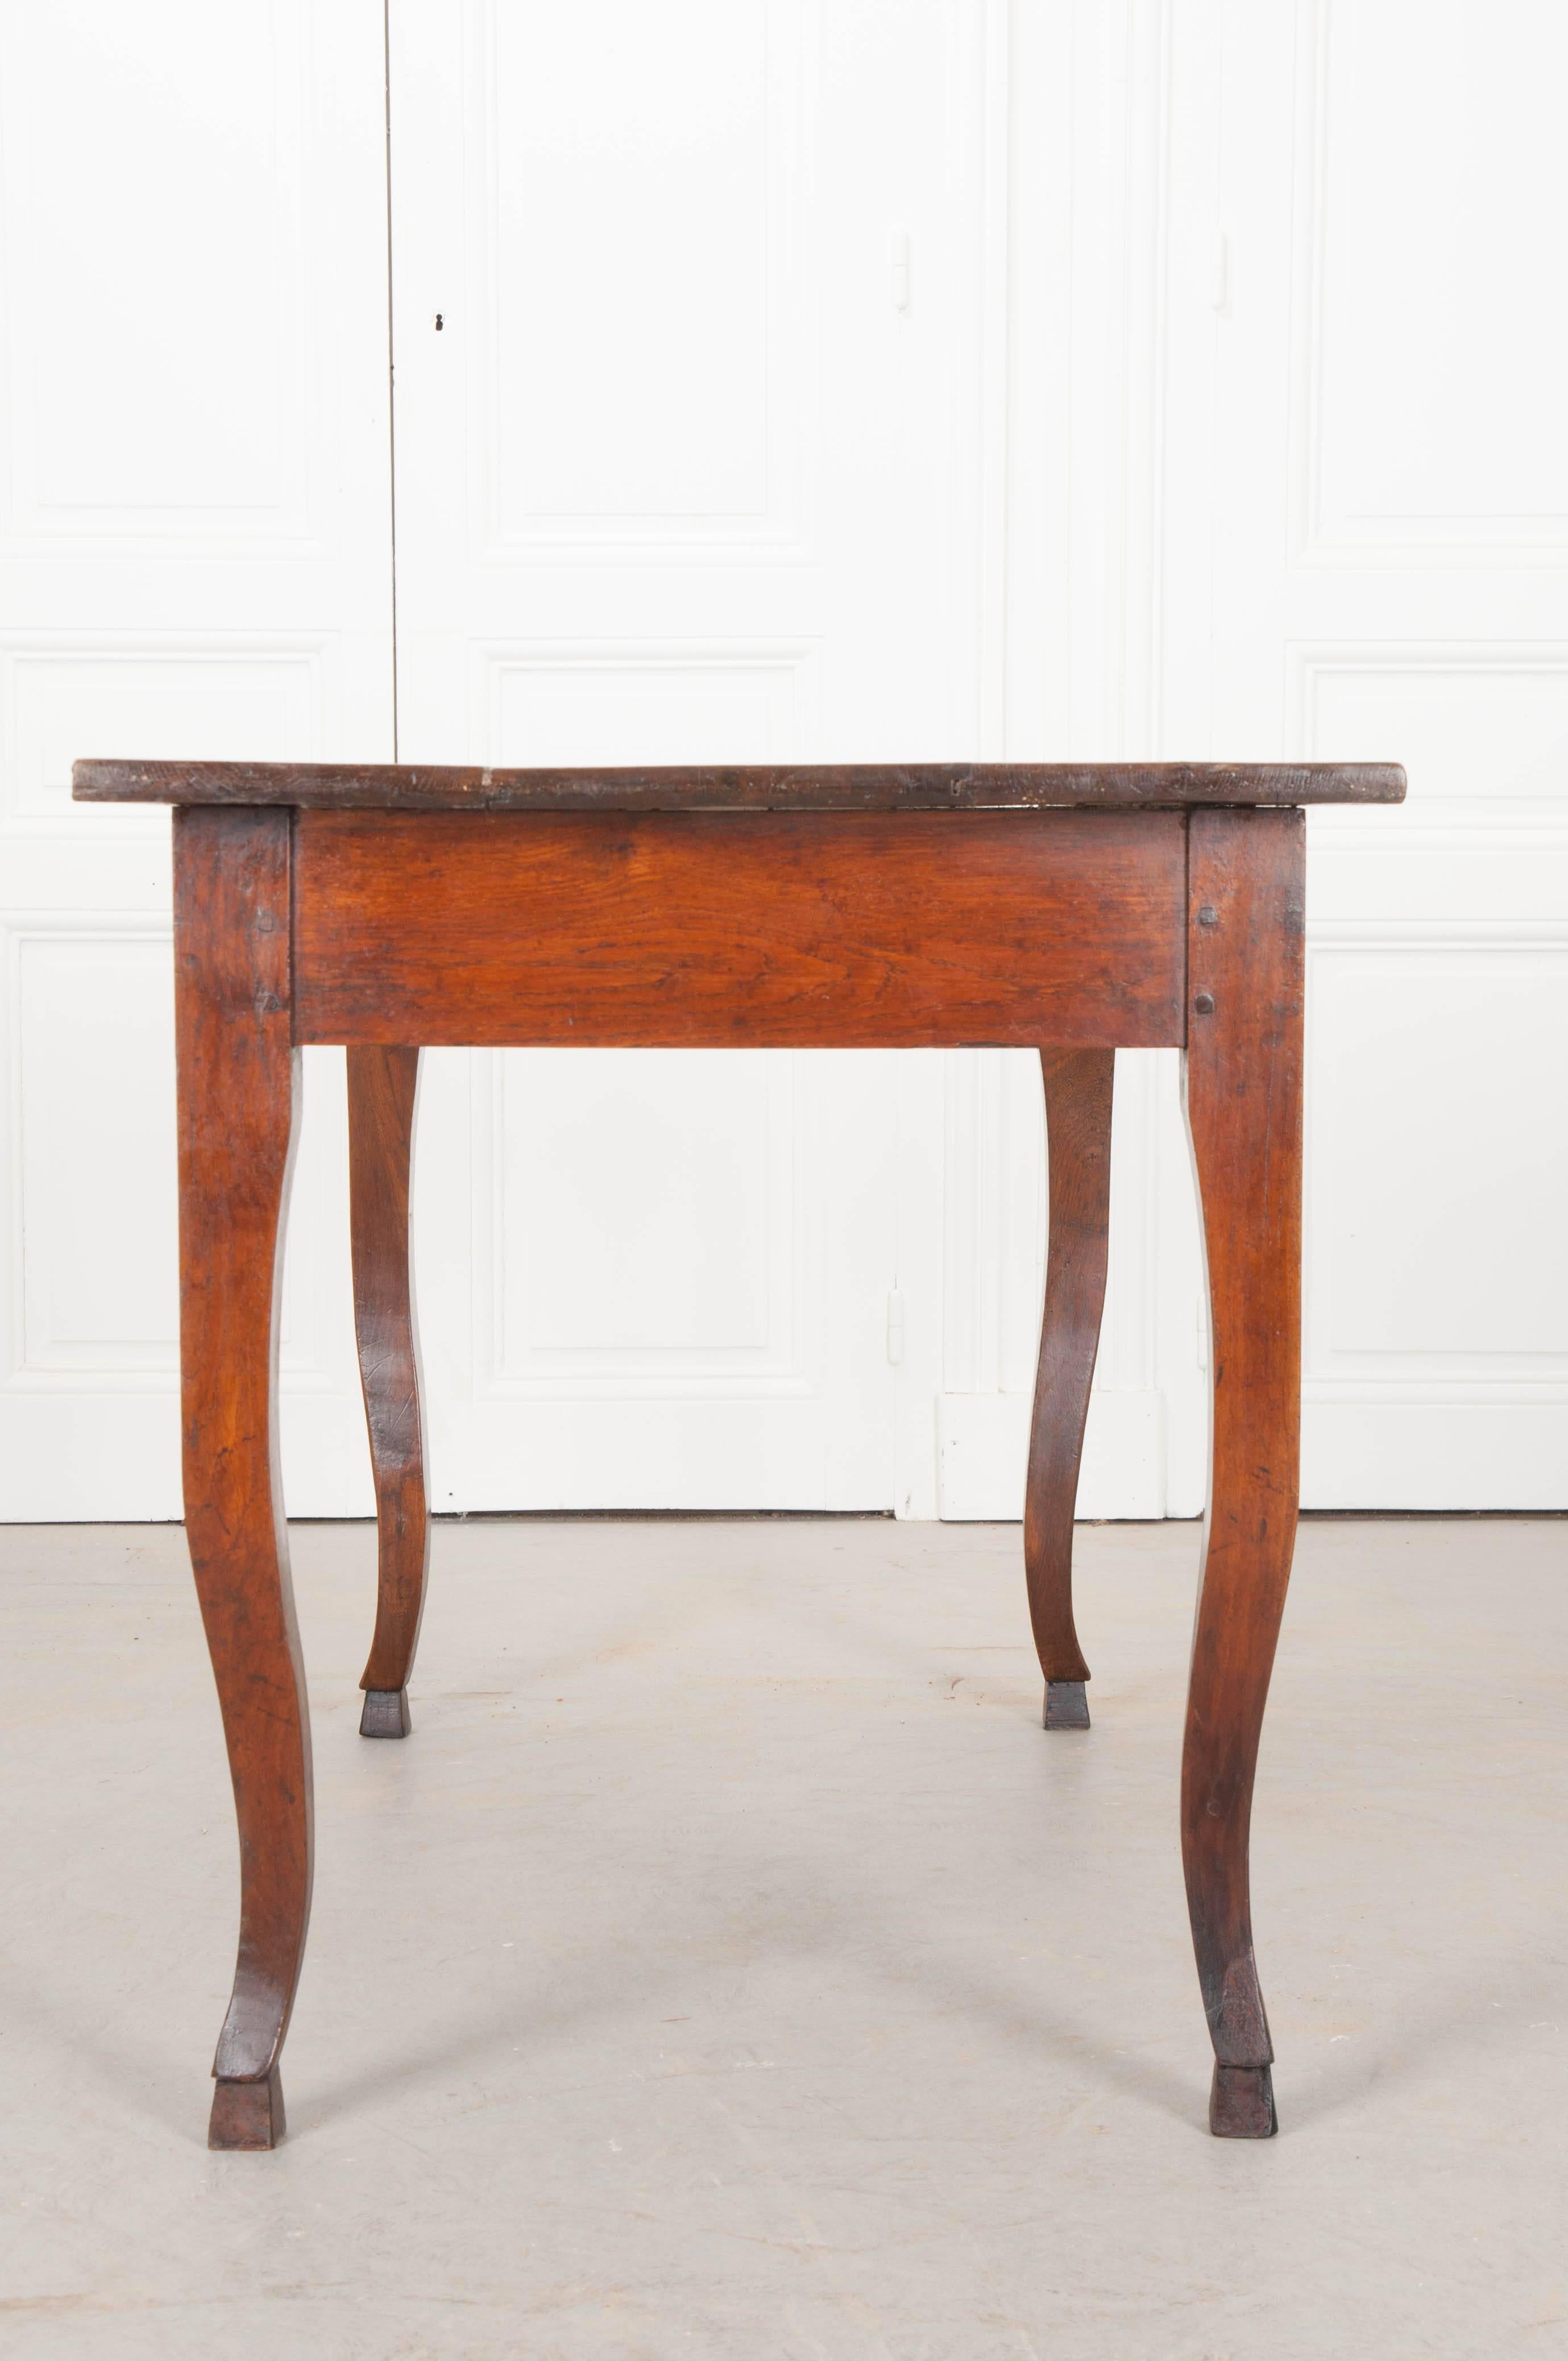 Country French, 19th Century, Oak Cabriole Leg Table